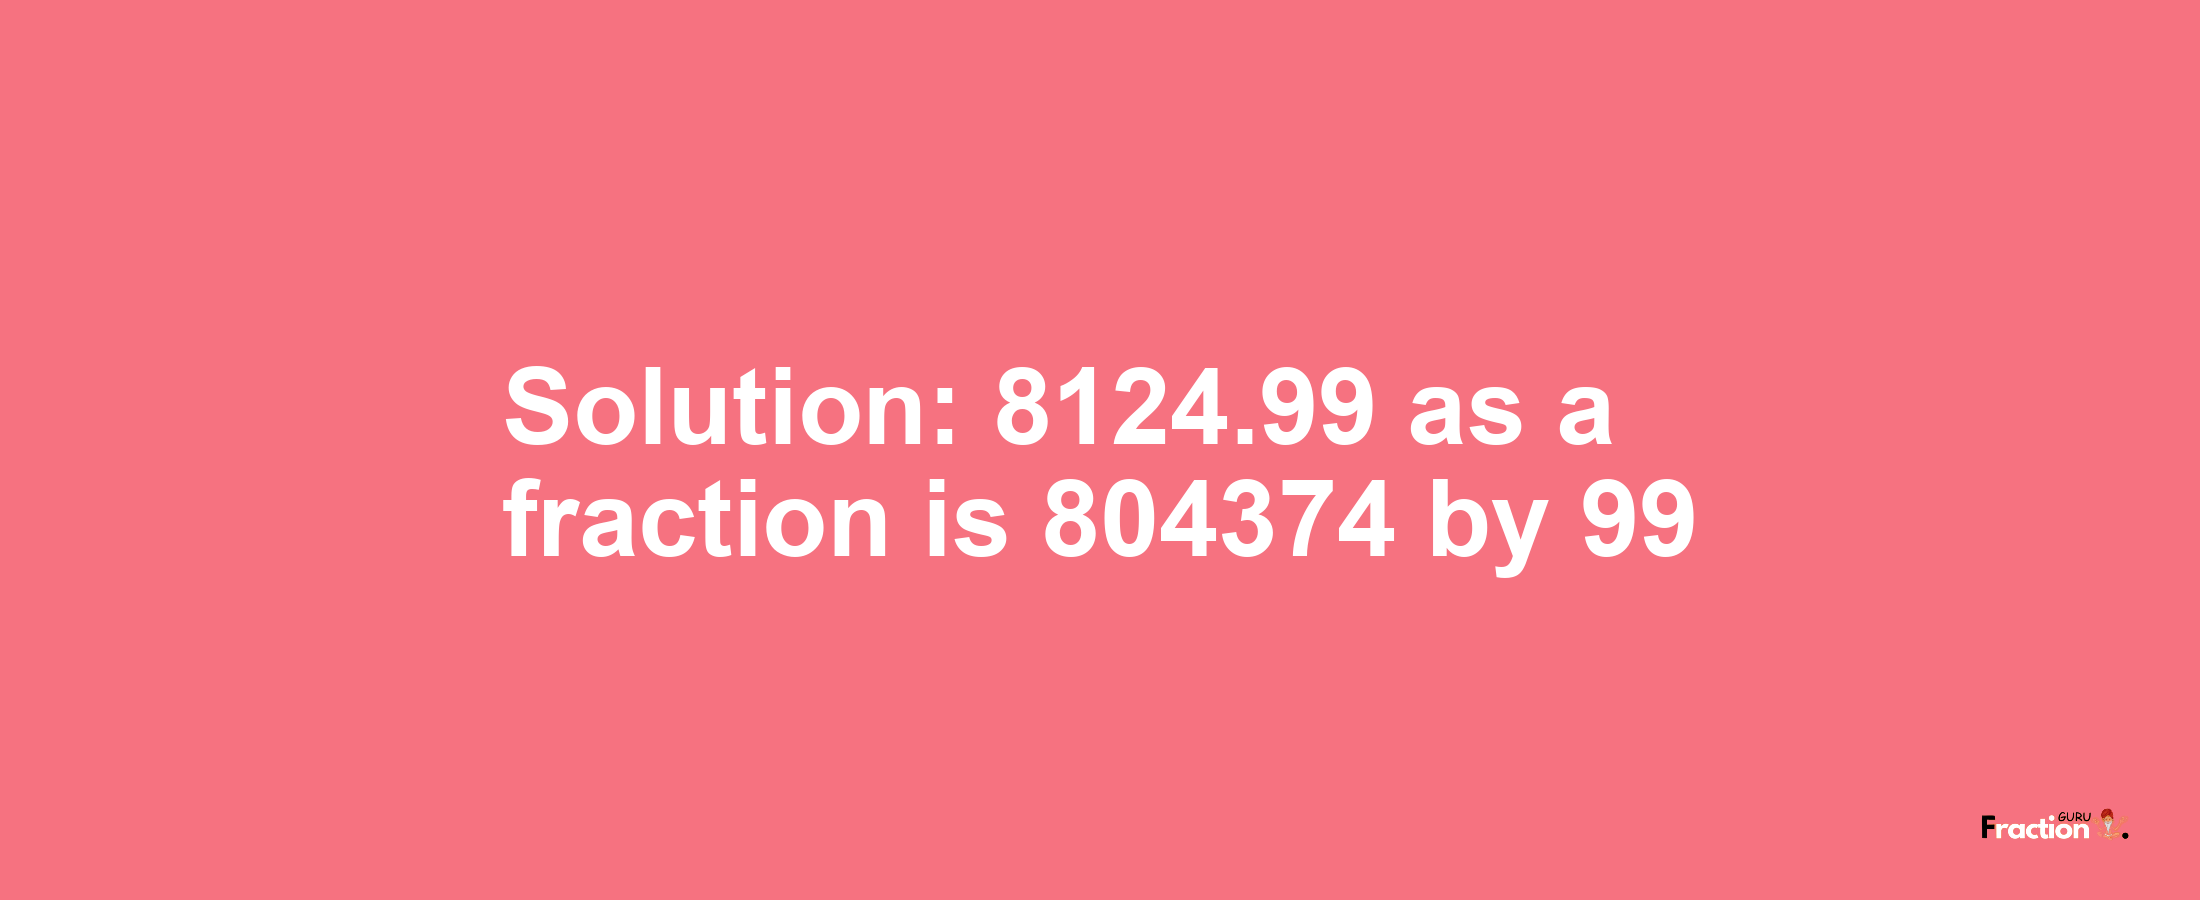 Solution:8124.99 as a fraction is 804374/99